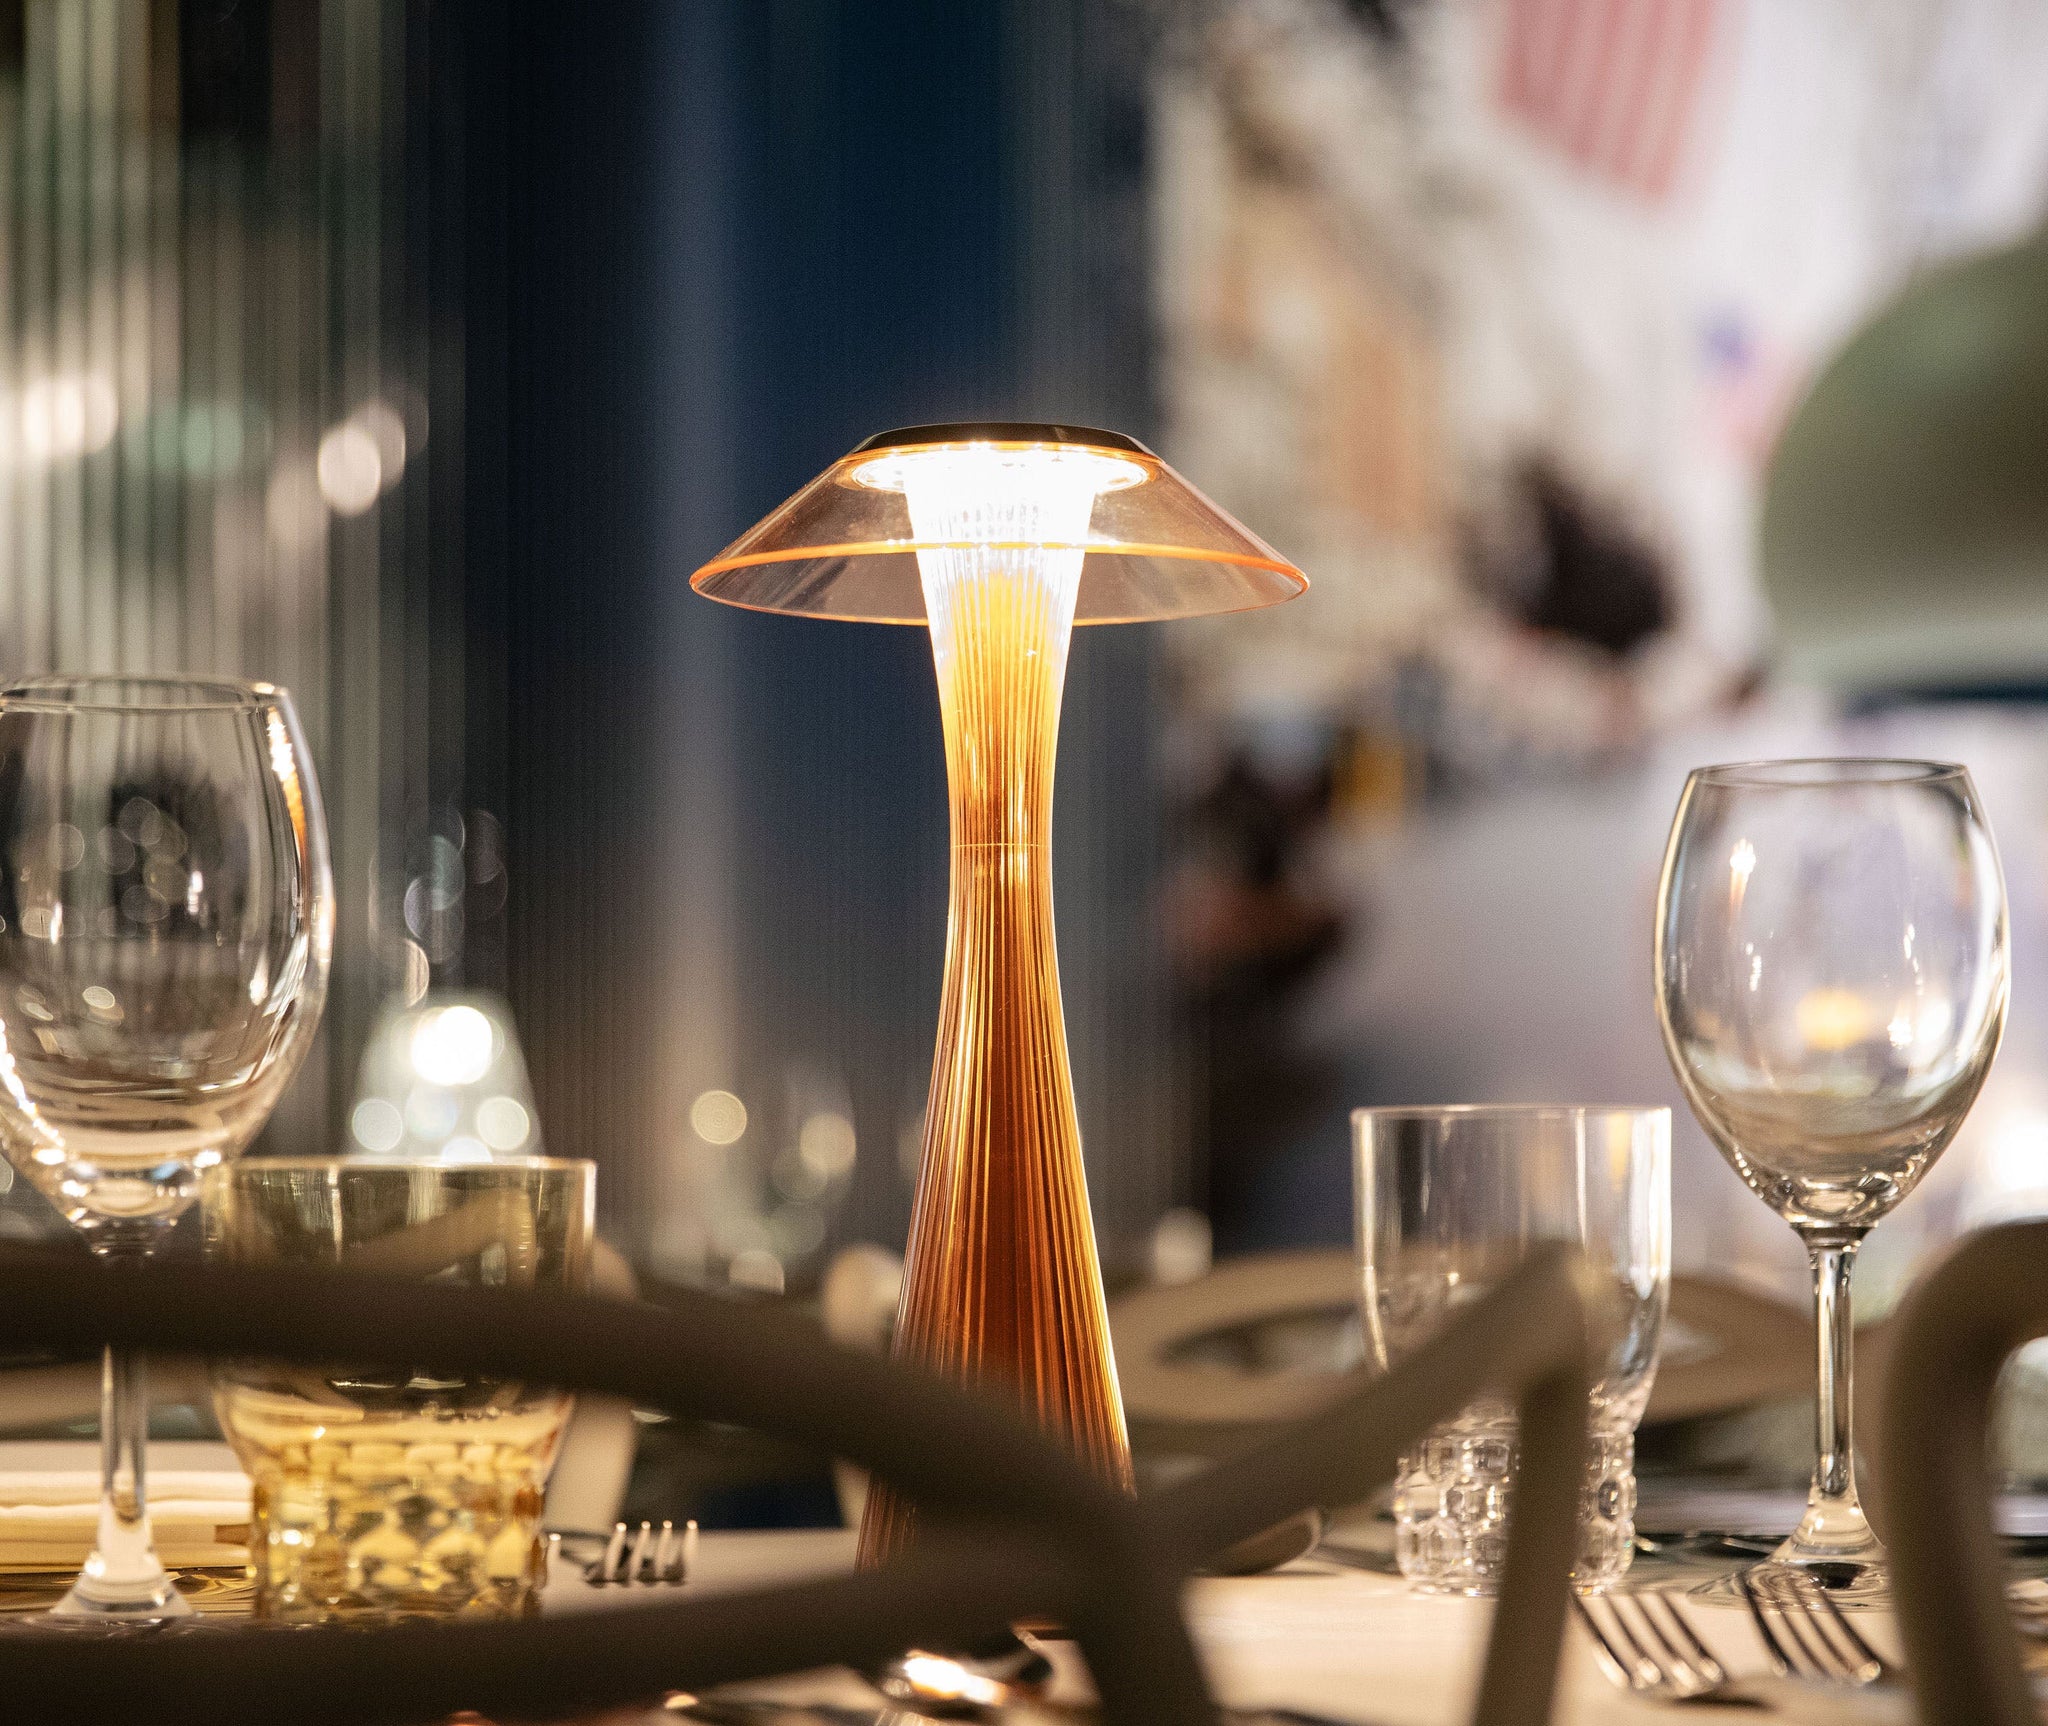 Space Table Lamp - More Options